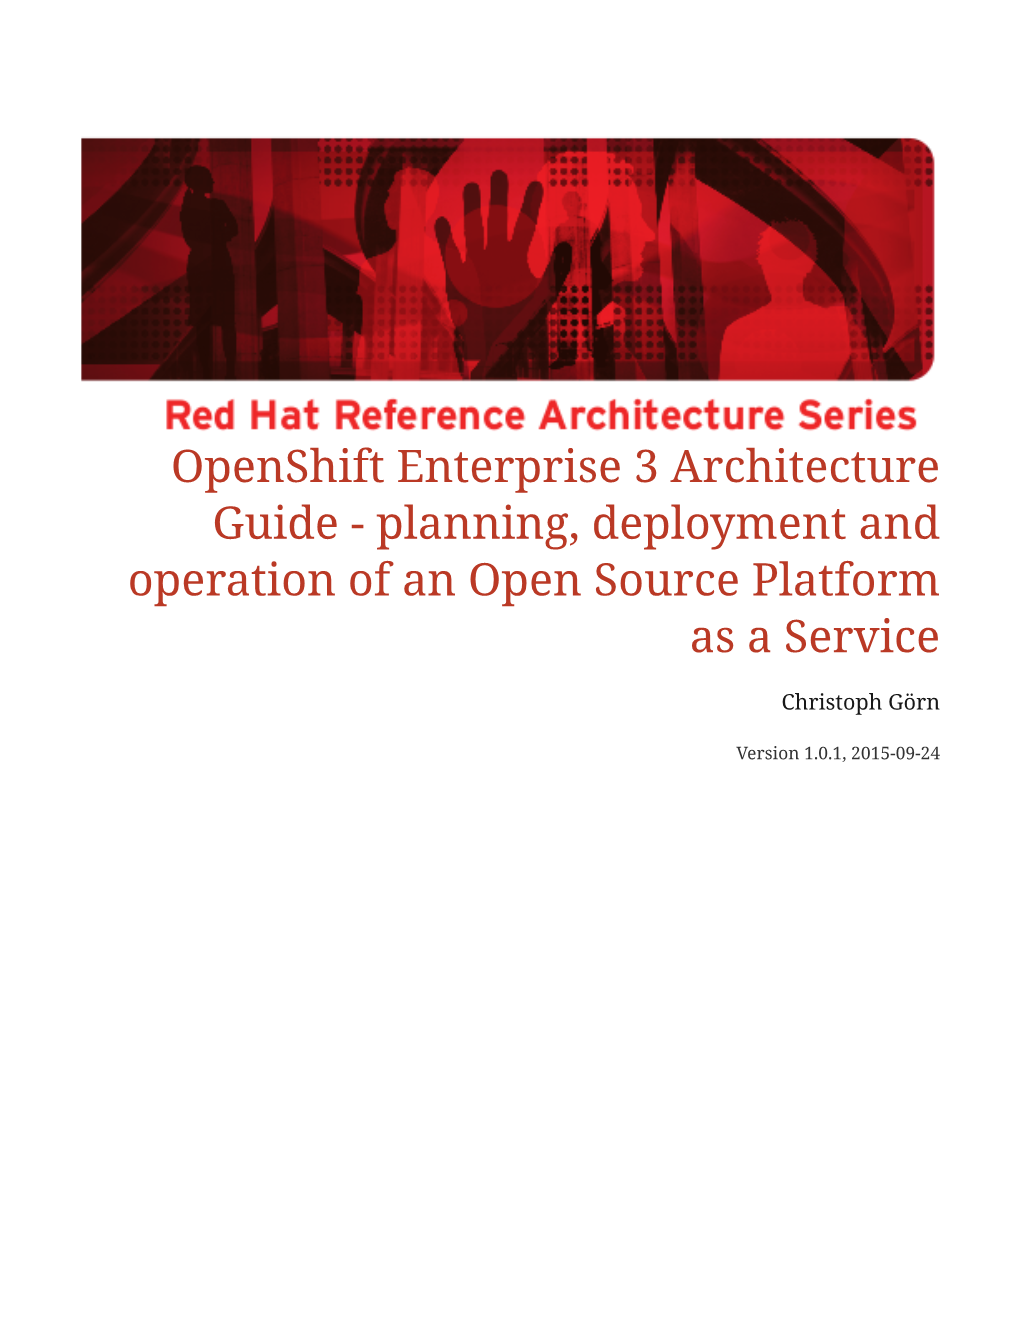 Openshift Enterprise 3 Architecture Guide - Planning, Deployment and Operation of an Open Source Platform As a Service